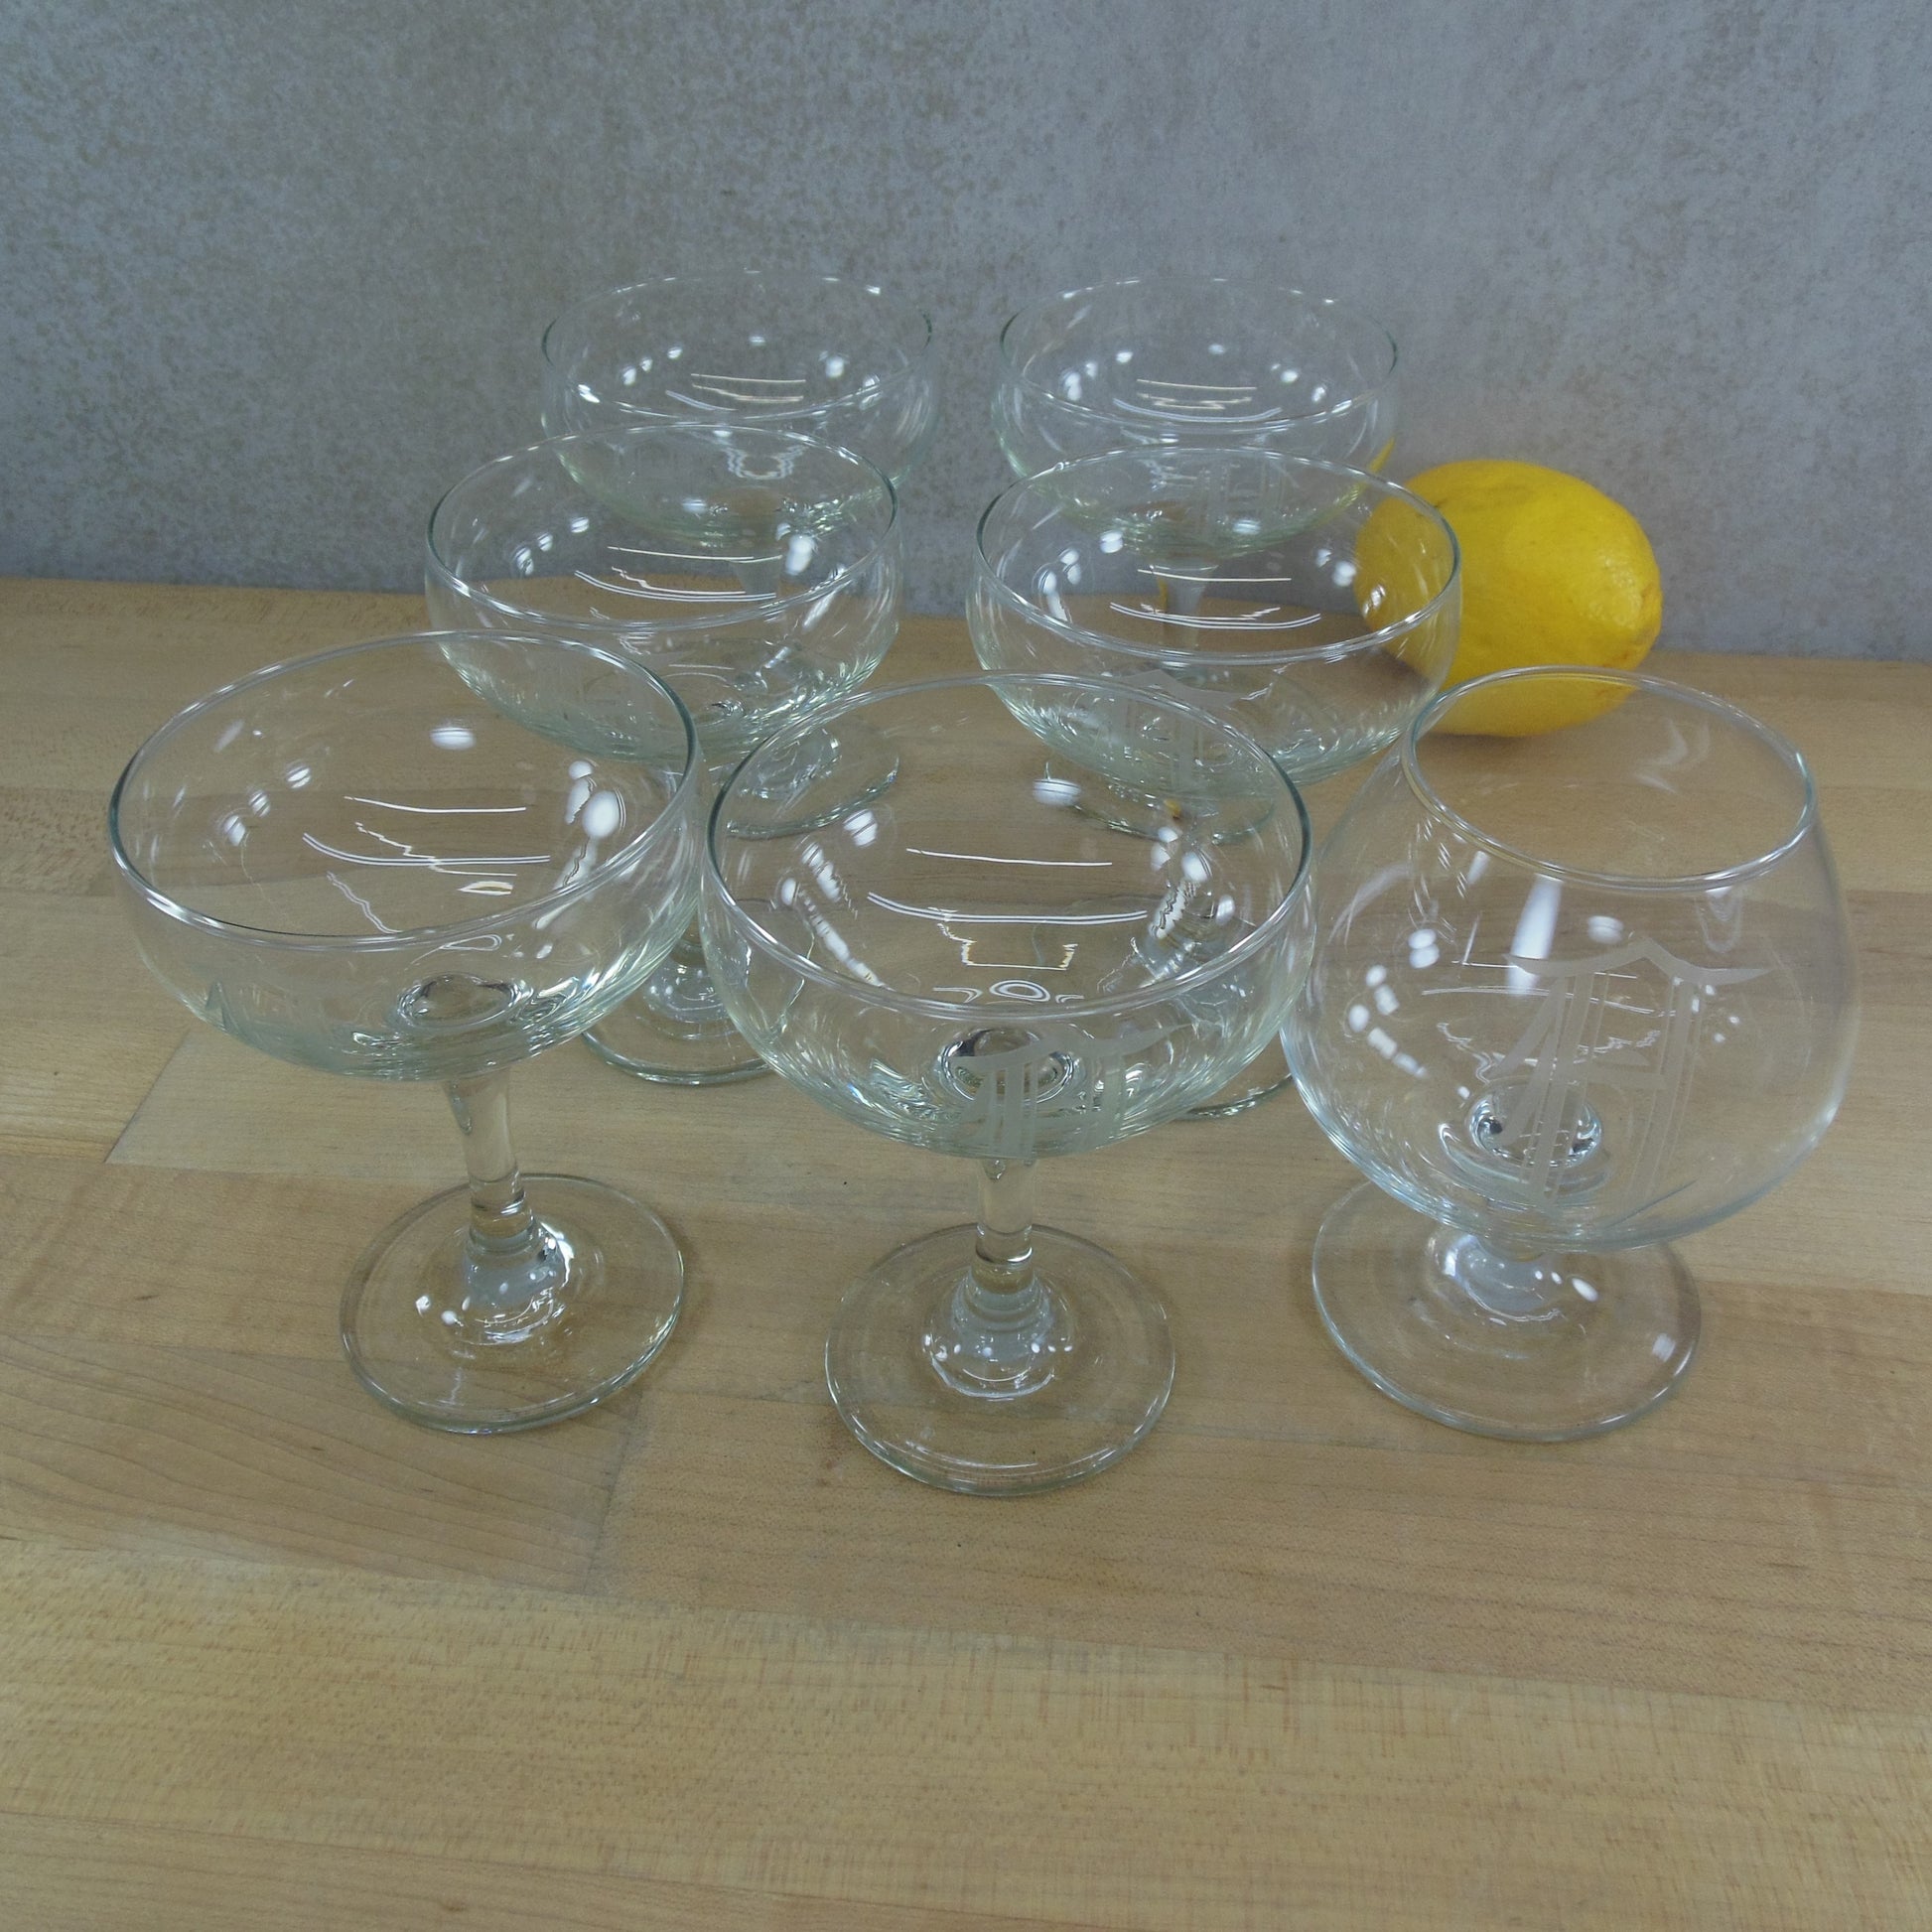 Cocktail Barware Glasses & Brandy Snifter Cut Glass Monogram A Vintage Used